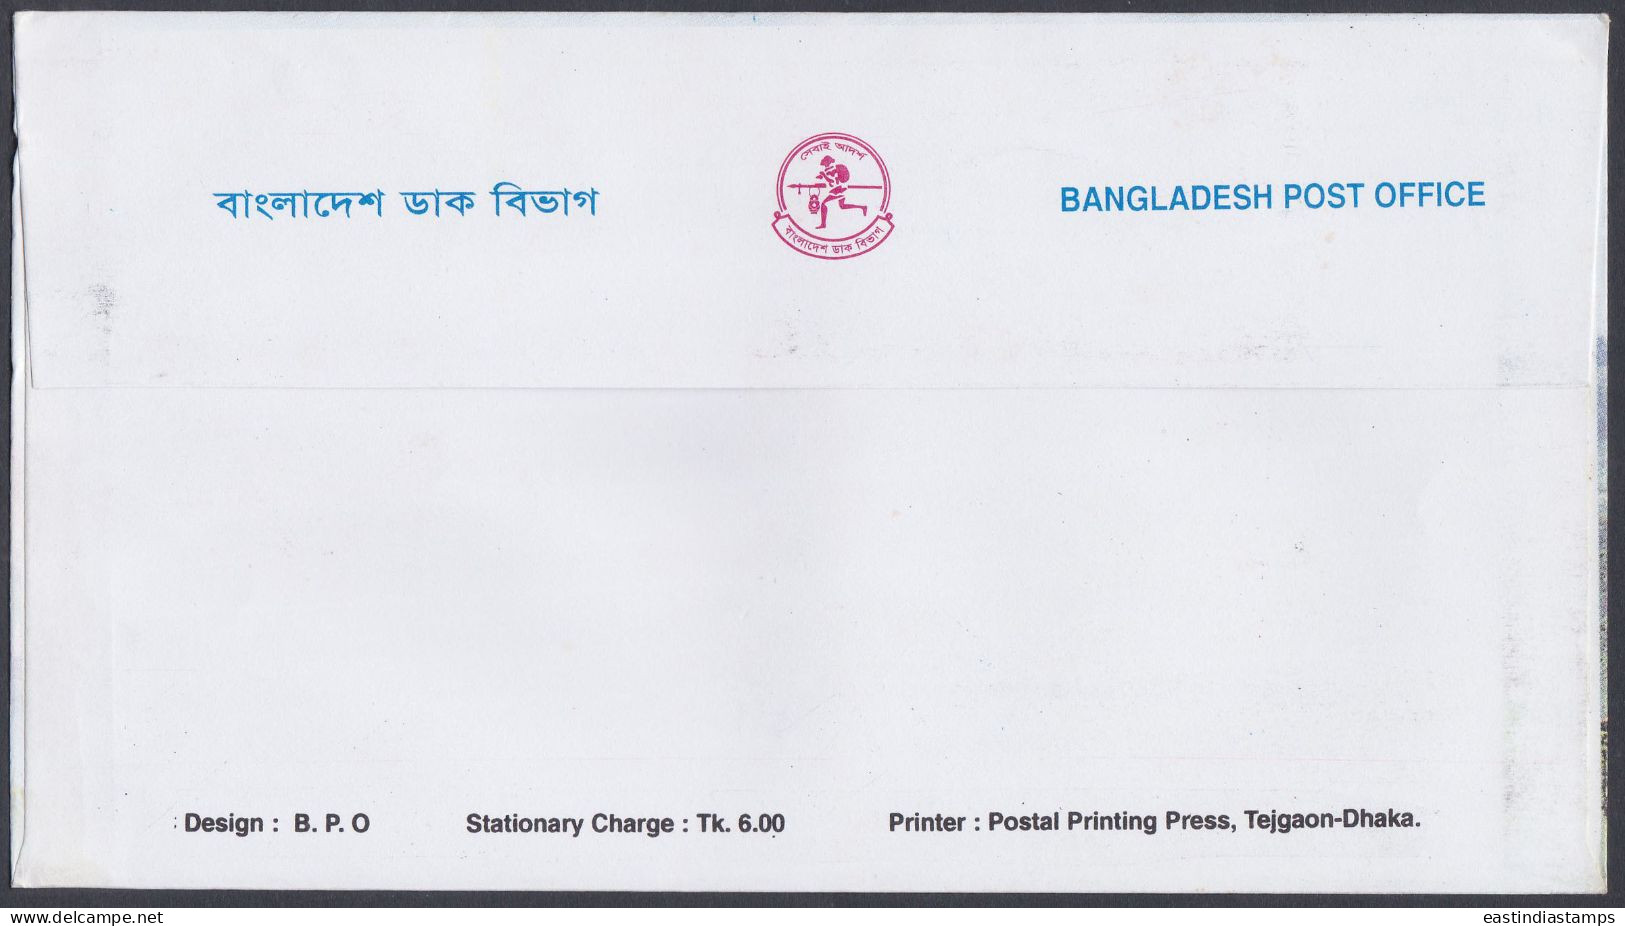 Bangladesh 2010 FDC Indigenous Peoples, Native People, Natives, Tribal, Women, First Day Cover - Bangladesch